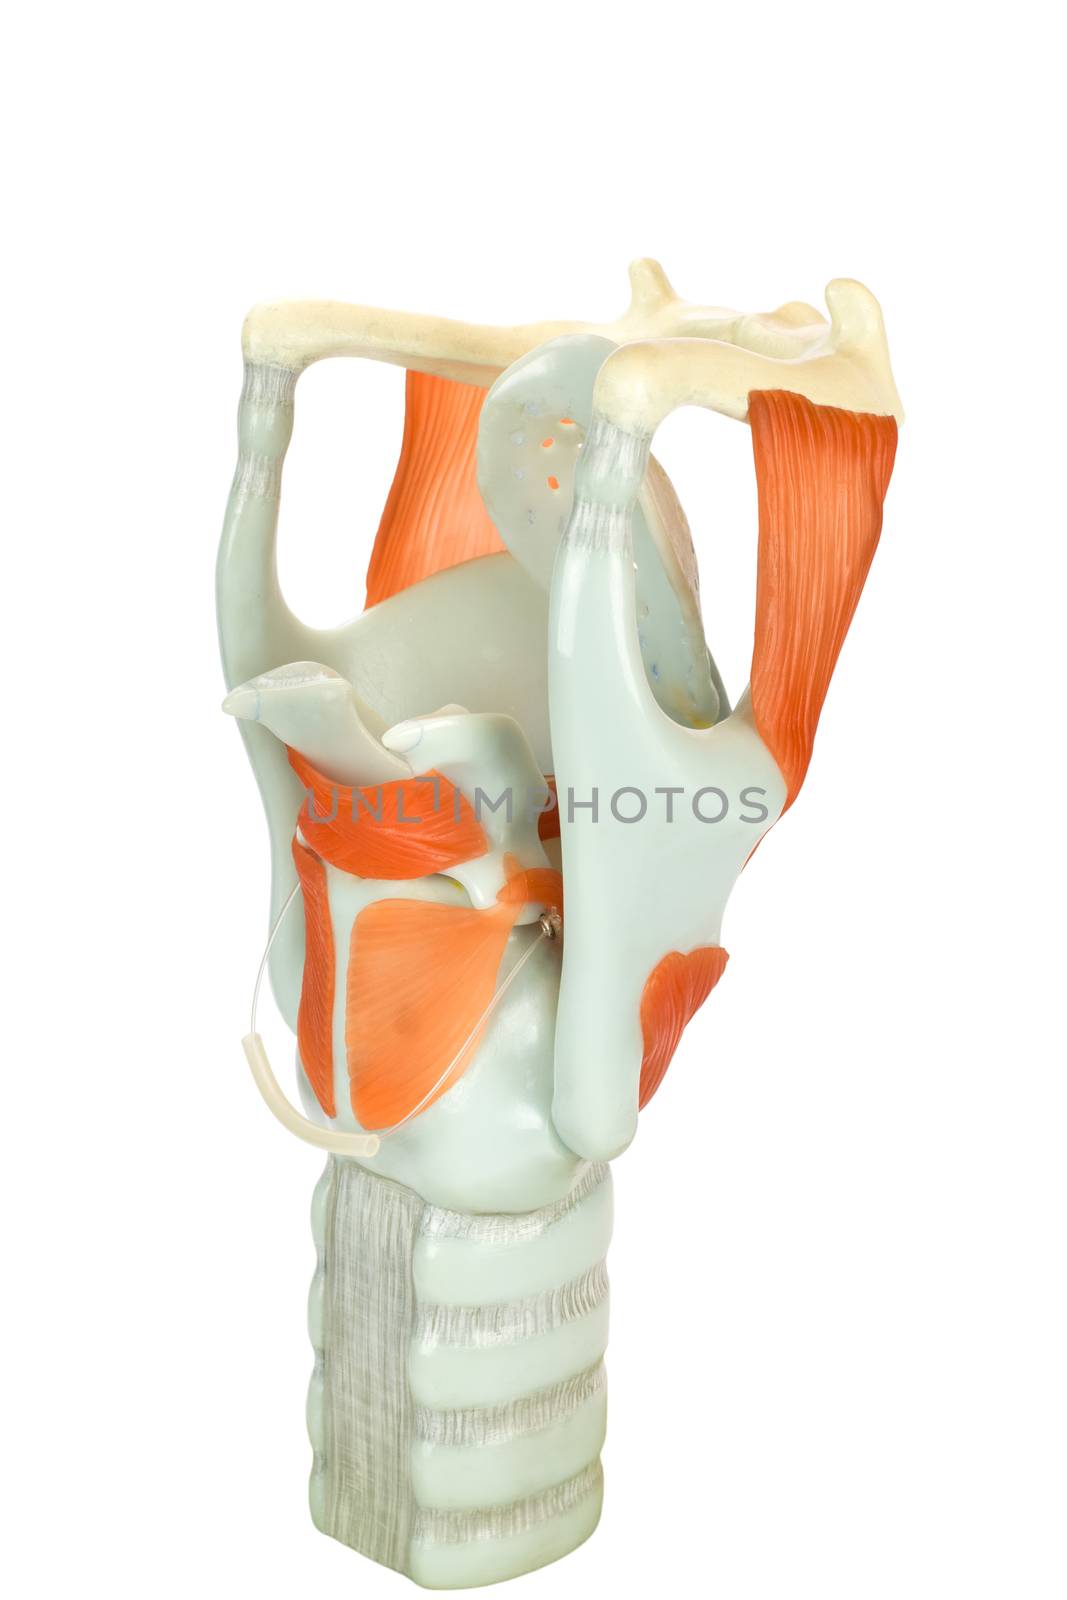 Model of human larynx or voive box with vocal cords by BenSchonewille